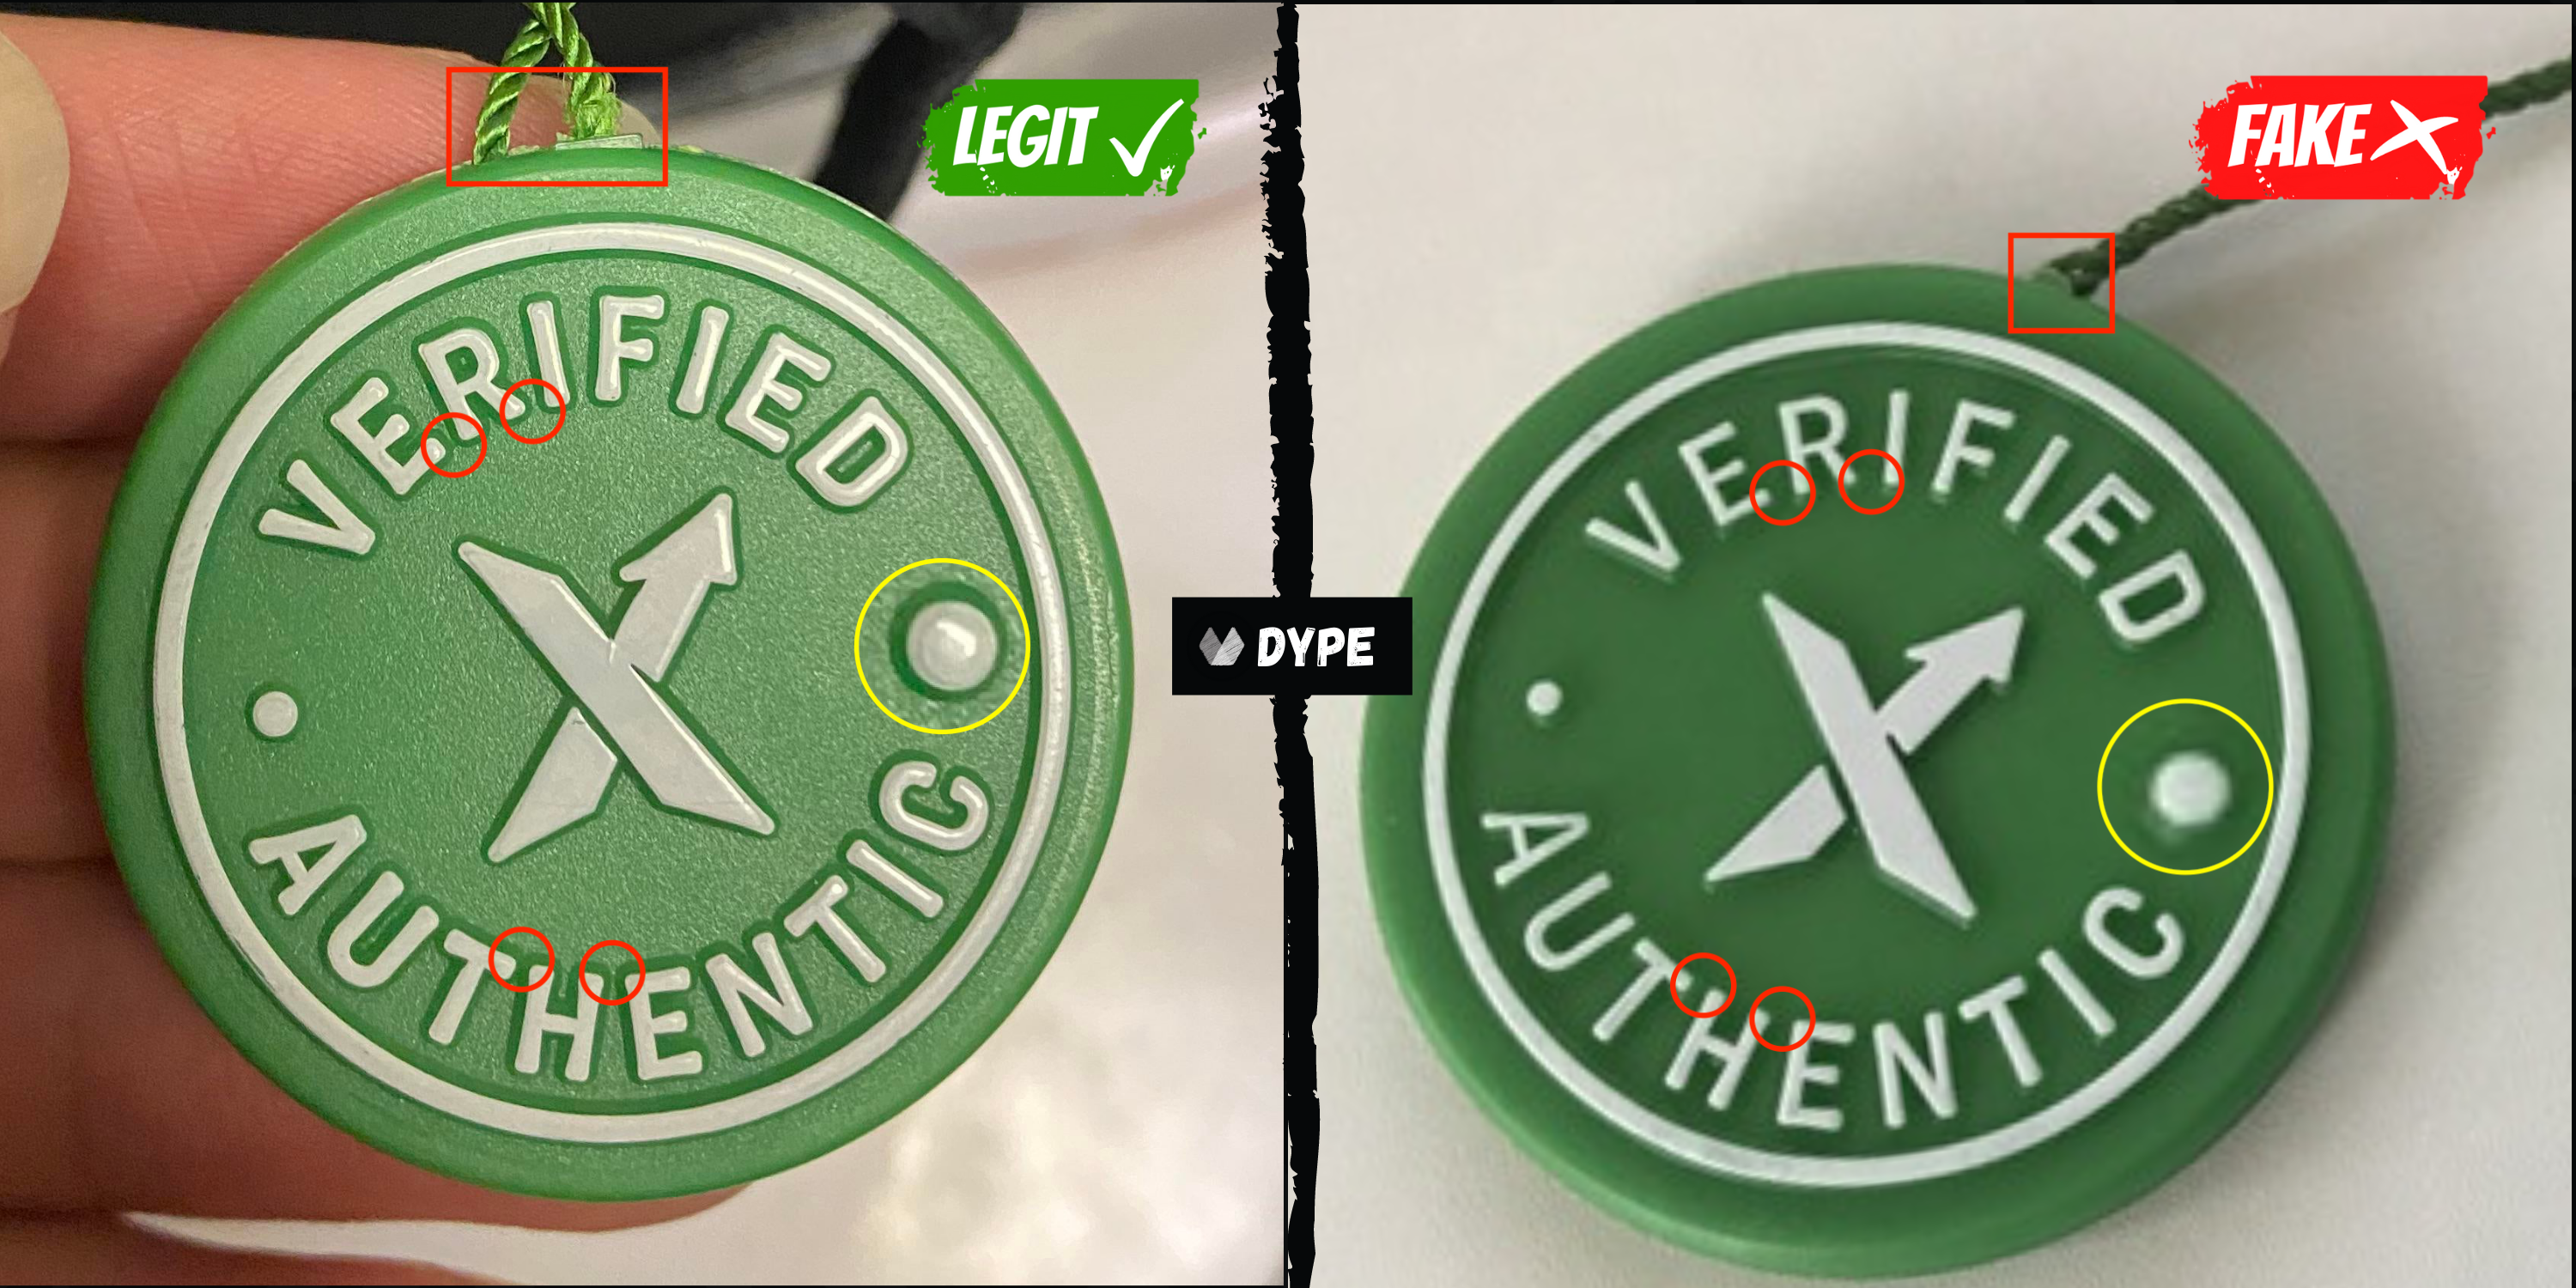 Hot Verified Authentic Stock X Tag QR Code Sticker X Card Green